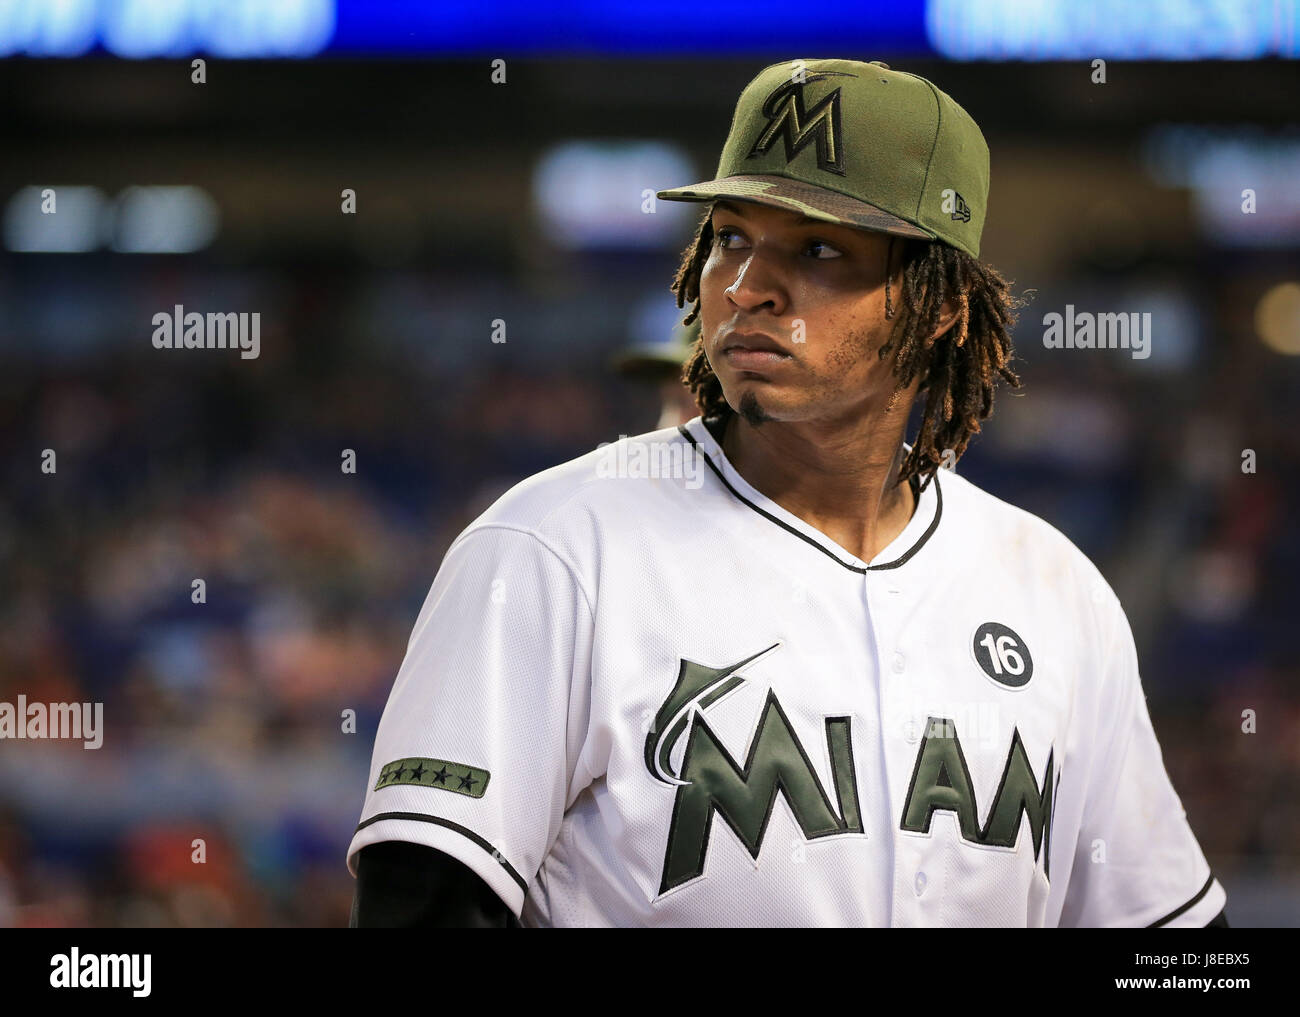 Miami, Florida, USA. 28th May, 2017. Miami Marlins opening pitcher Jose Urena (62) returns to the dugout during a MLB game between the Los Angeles Angels and the Miami Marlins at the Marlins Park, in Miami, Florida. The Marlins won 9-2. Mario Houben/CSM/Alamy Live News Stock Photo